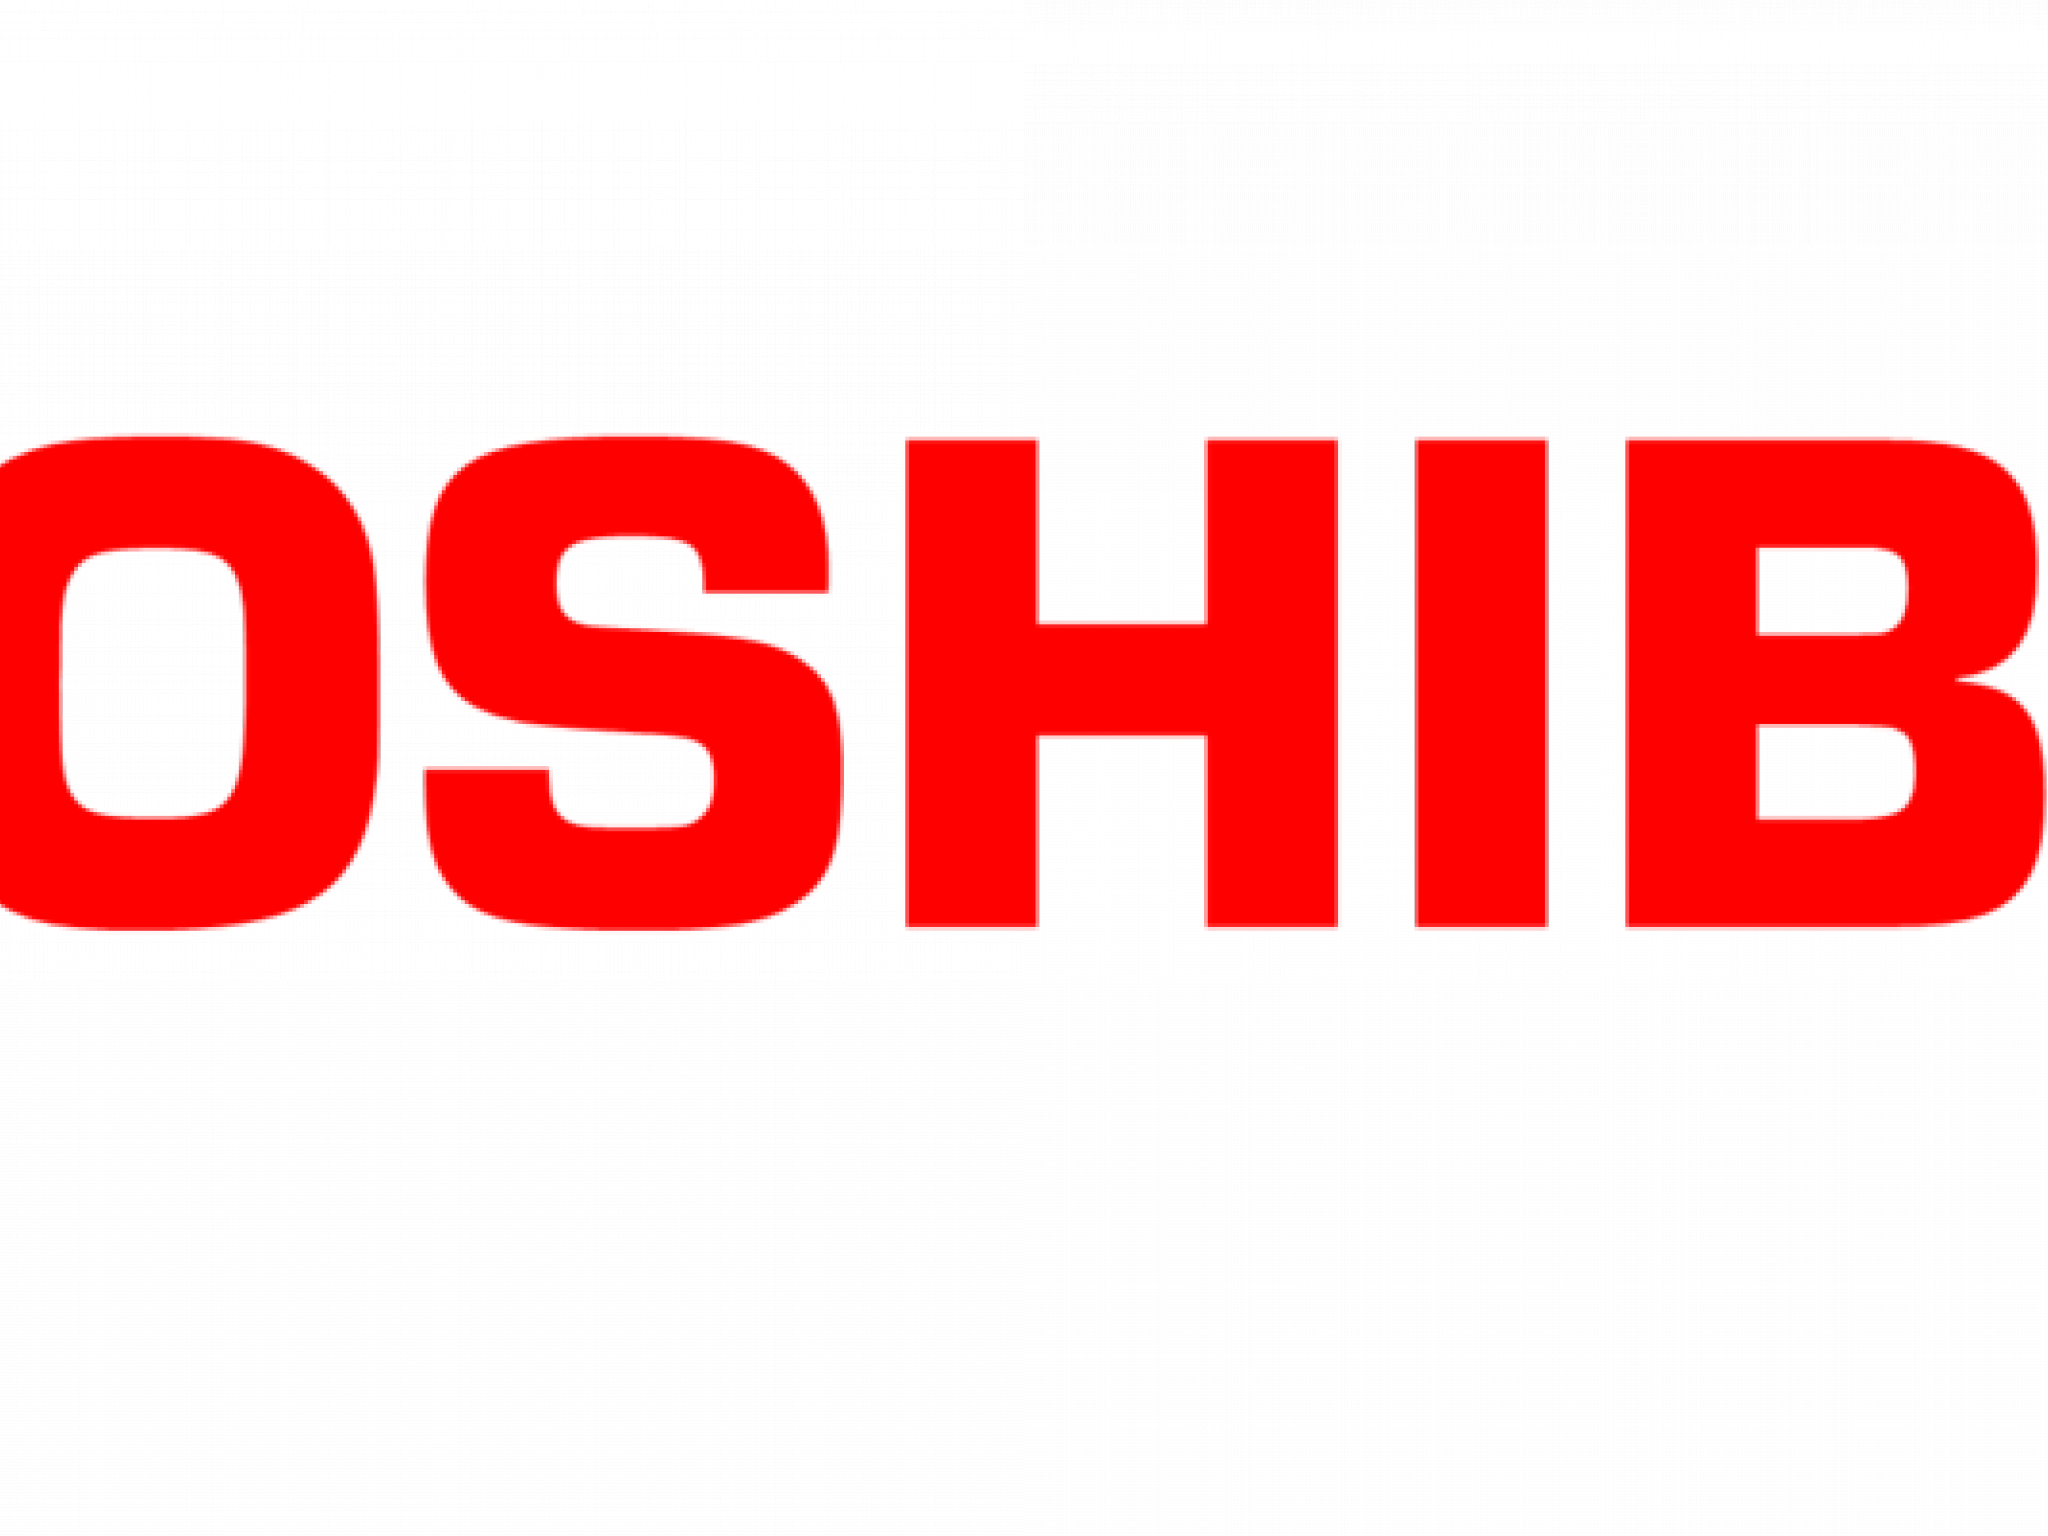  toshiba-shares-gain-on-reports-of-potential-19b-takeover-bid 